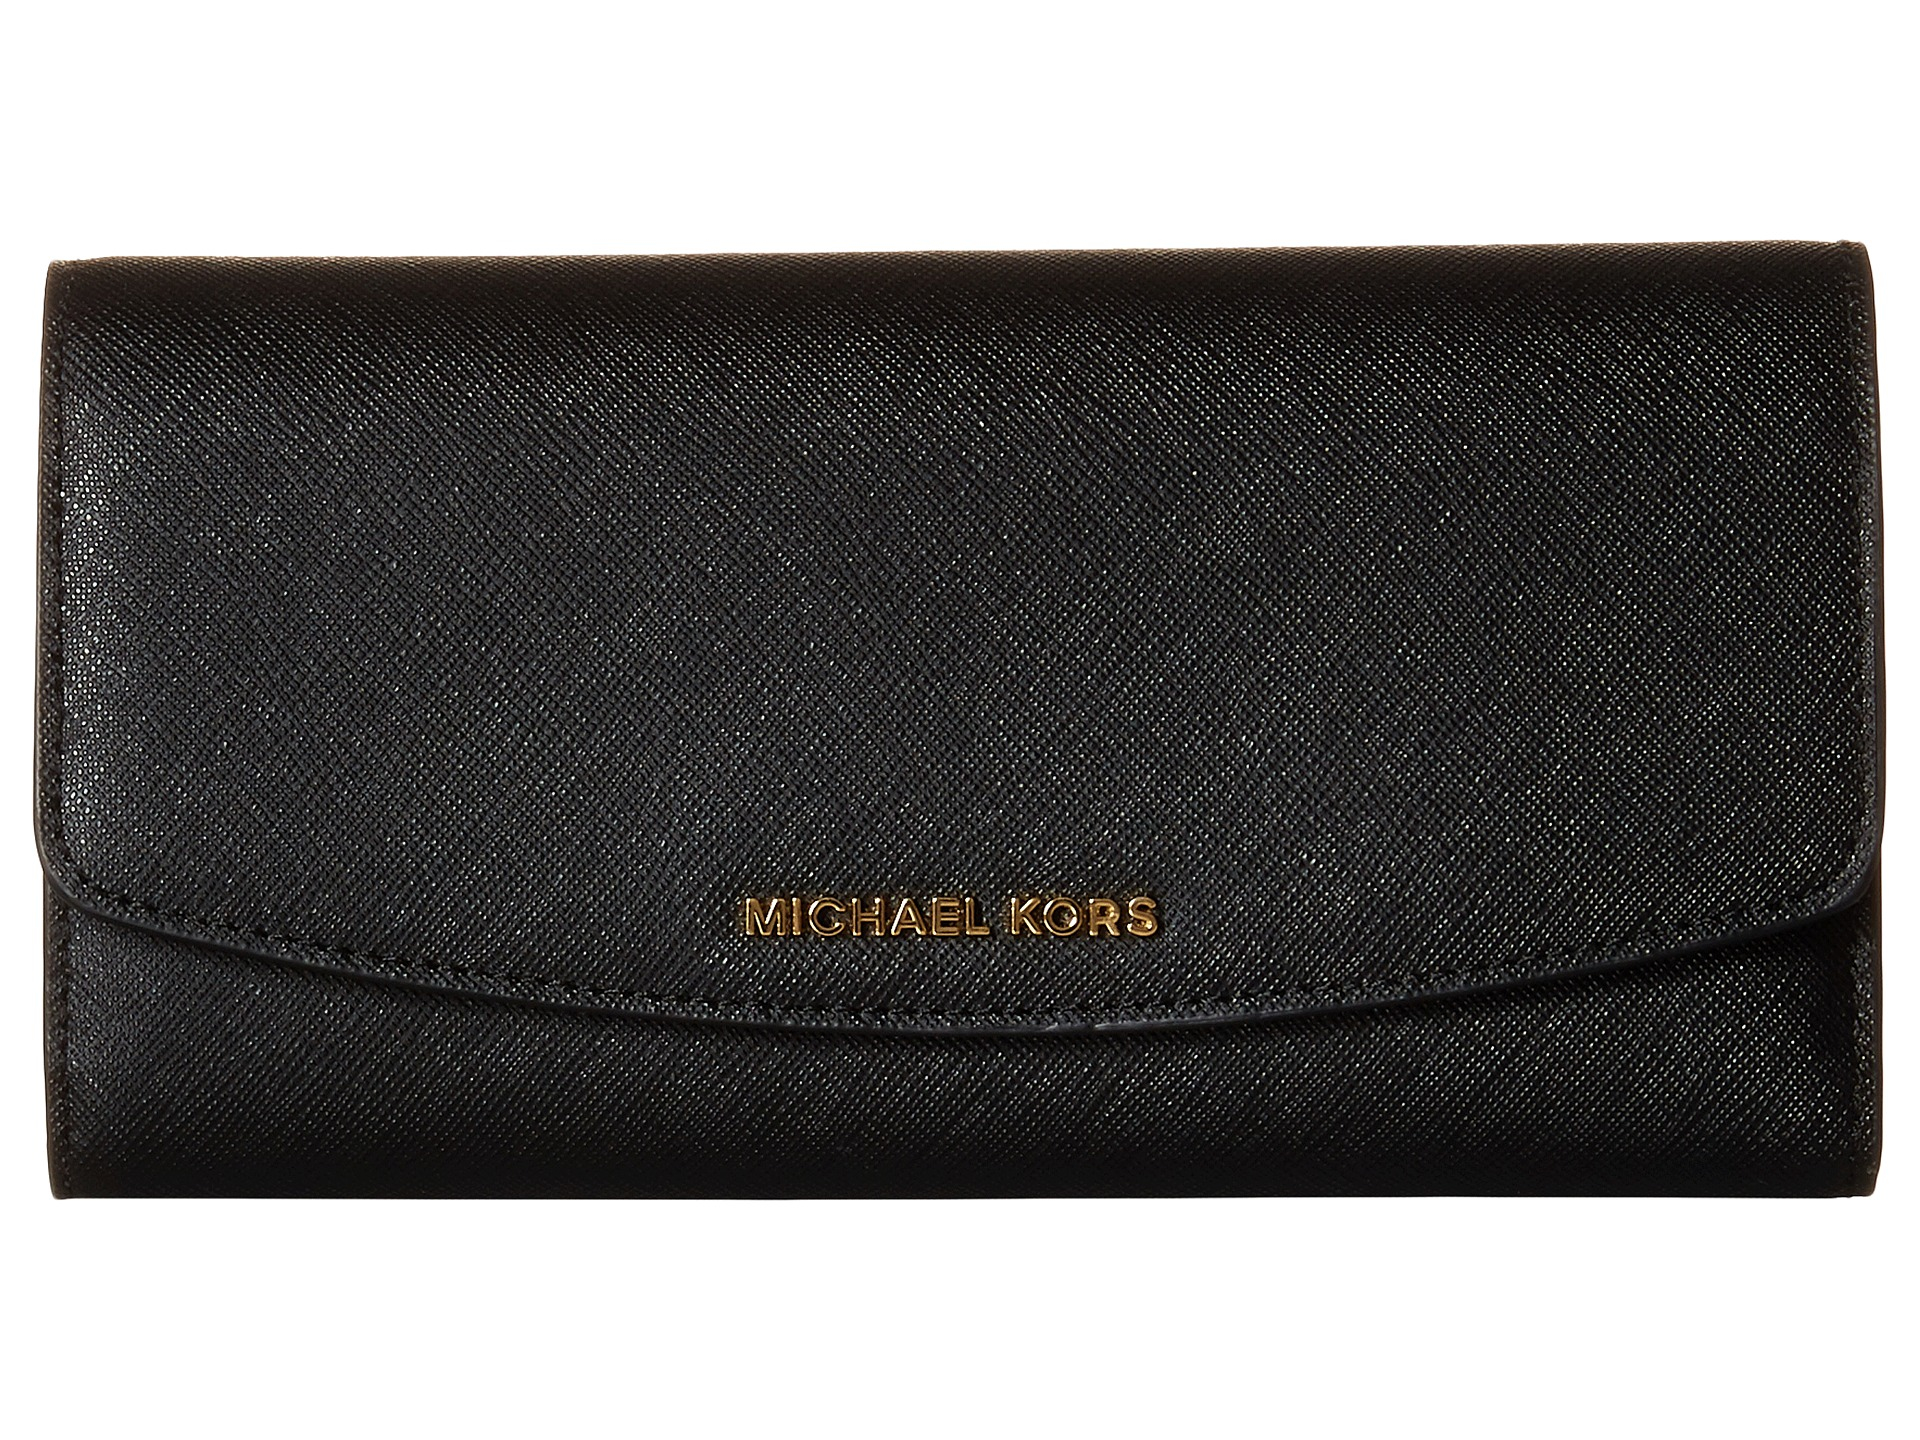 MICHAEL Michael Kors Ava Large Trifold Wallet in Black - Lyst